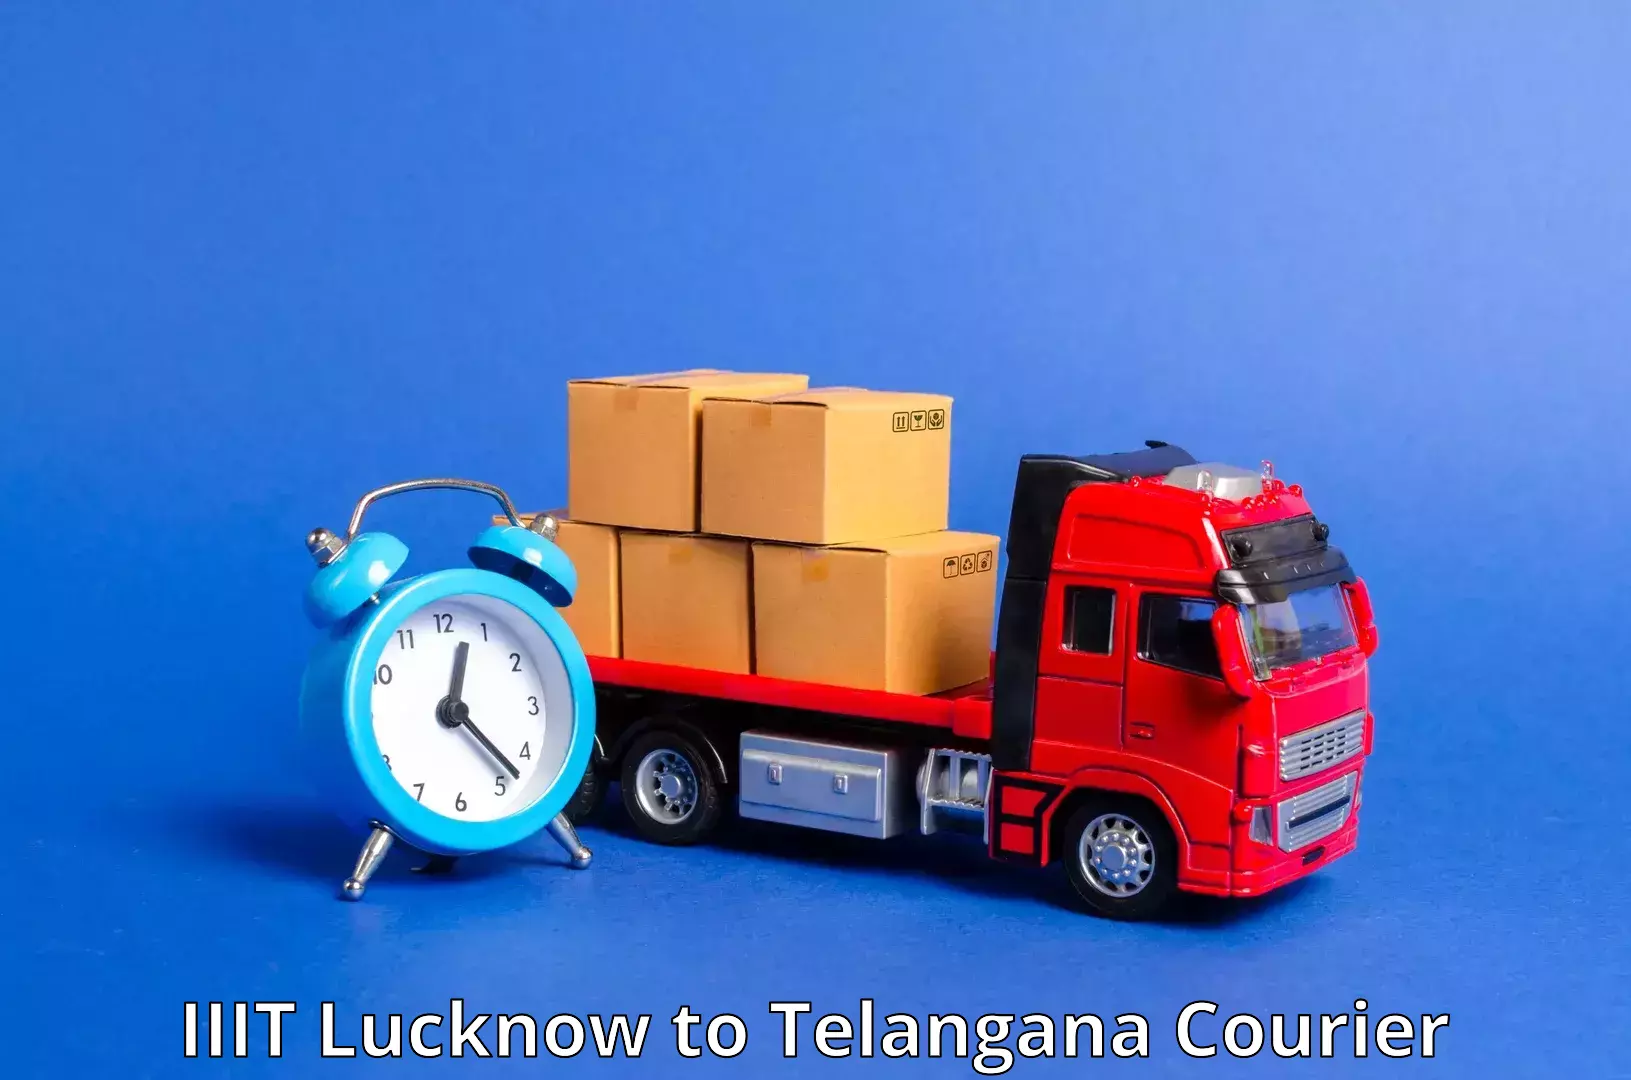 Speedy delivery service IIIT Lucknow to Telangana